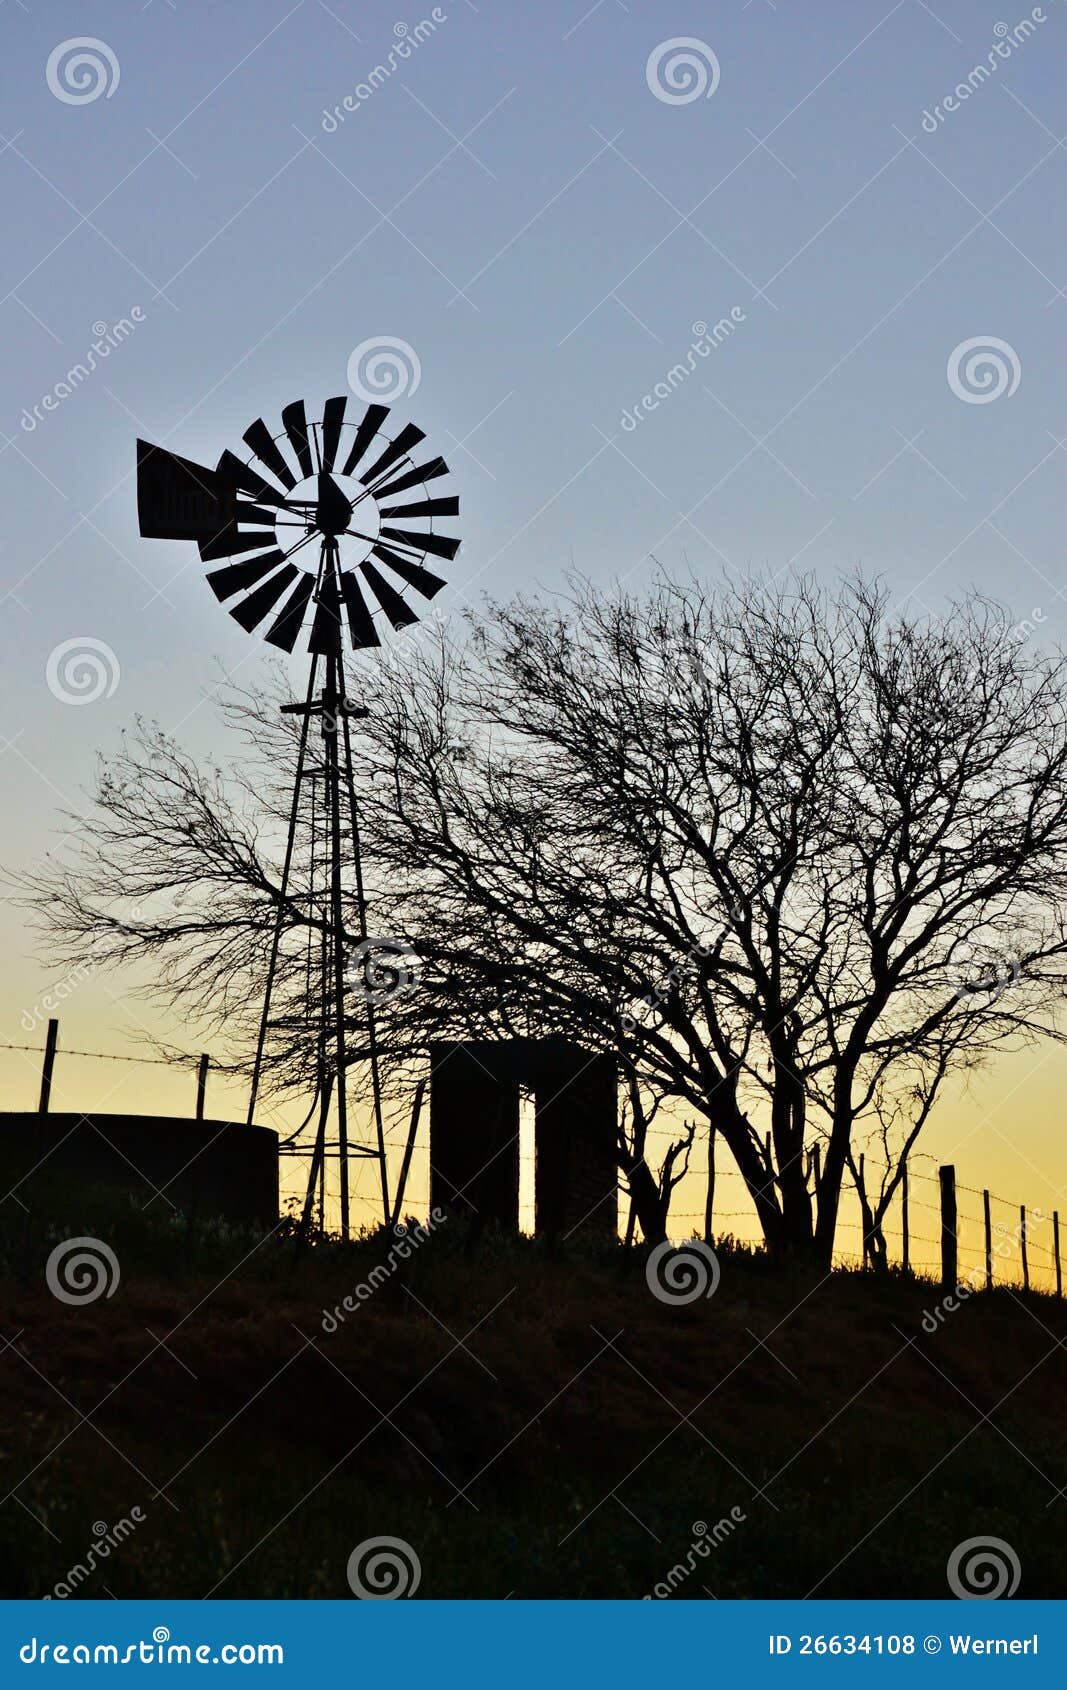 Landscape with windmill water pump on a swartland farm south africa.